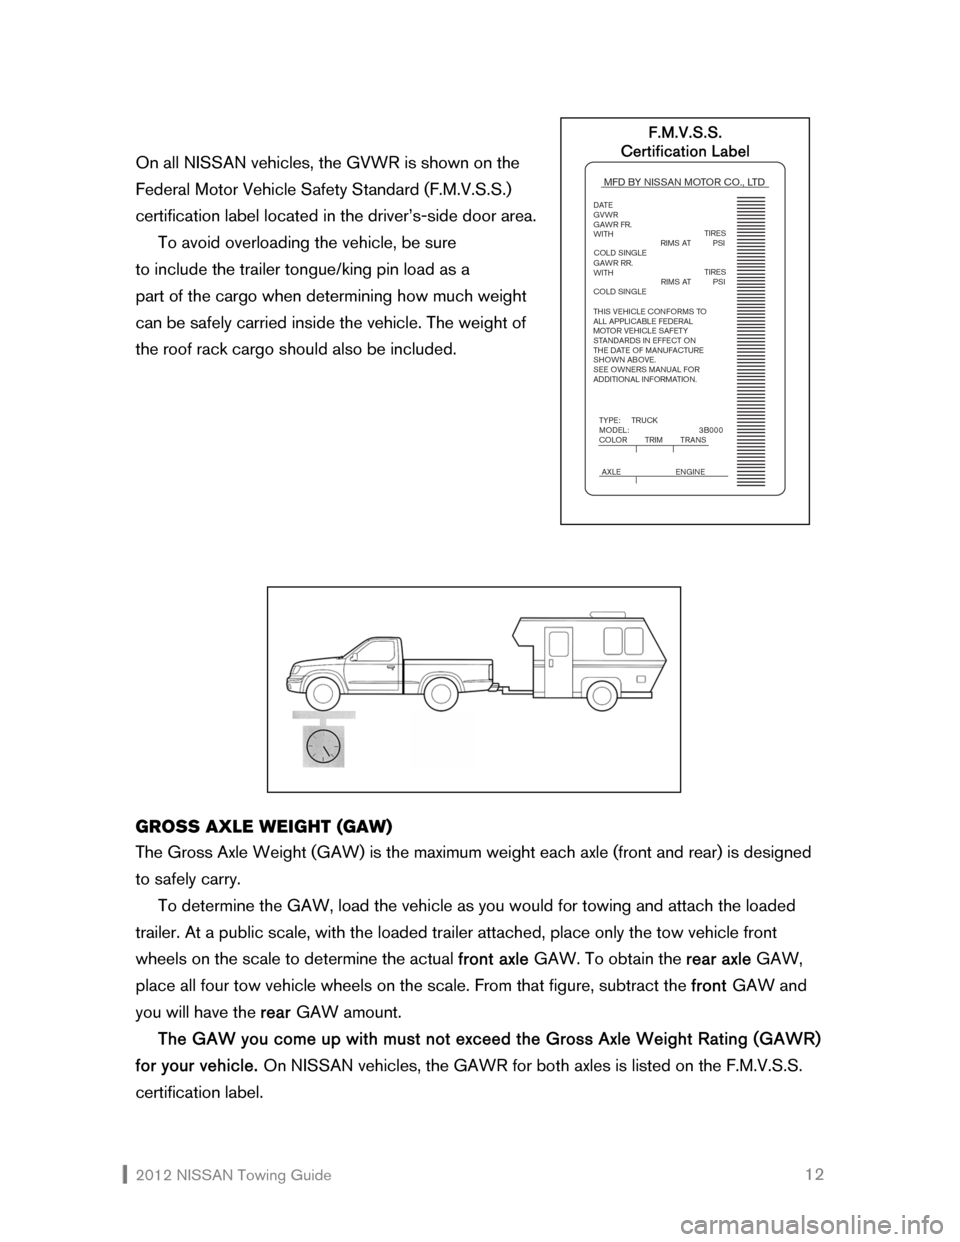 NISSAN CUBE 2012 3.G Towing Guide  2012 NISSAN Towing Guide    12 On all NISSAN vehicles, the GVWR is shown on the  
Federal Motor Vehicle Safety Standard (F.M.V.S.S.) 
certification label located in the driver’s-side door area.  
 